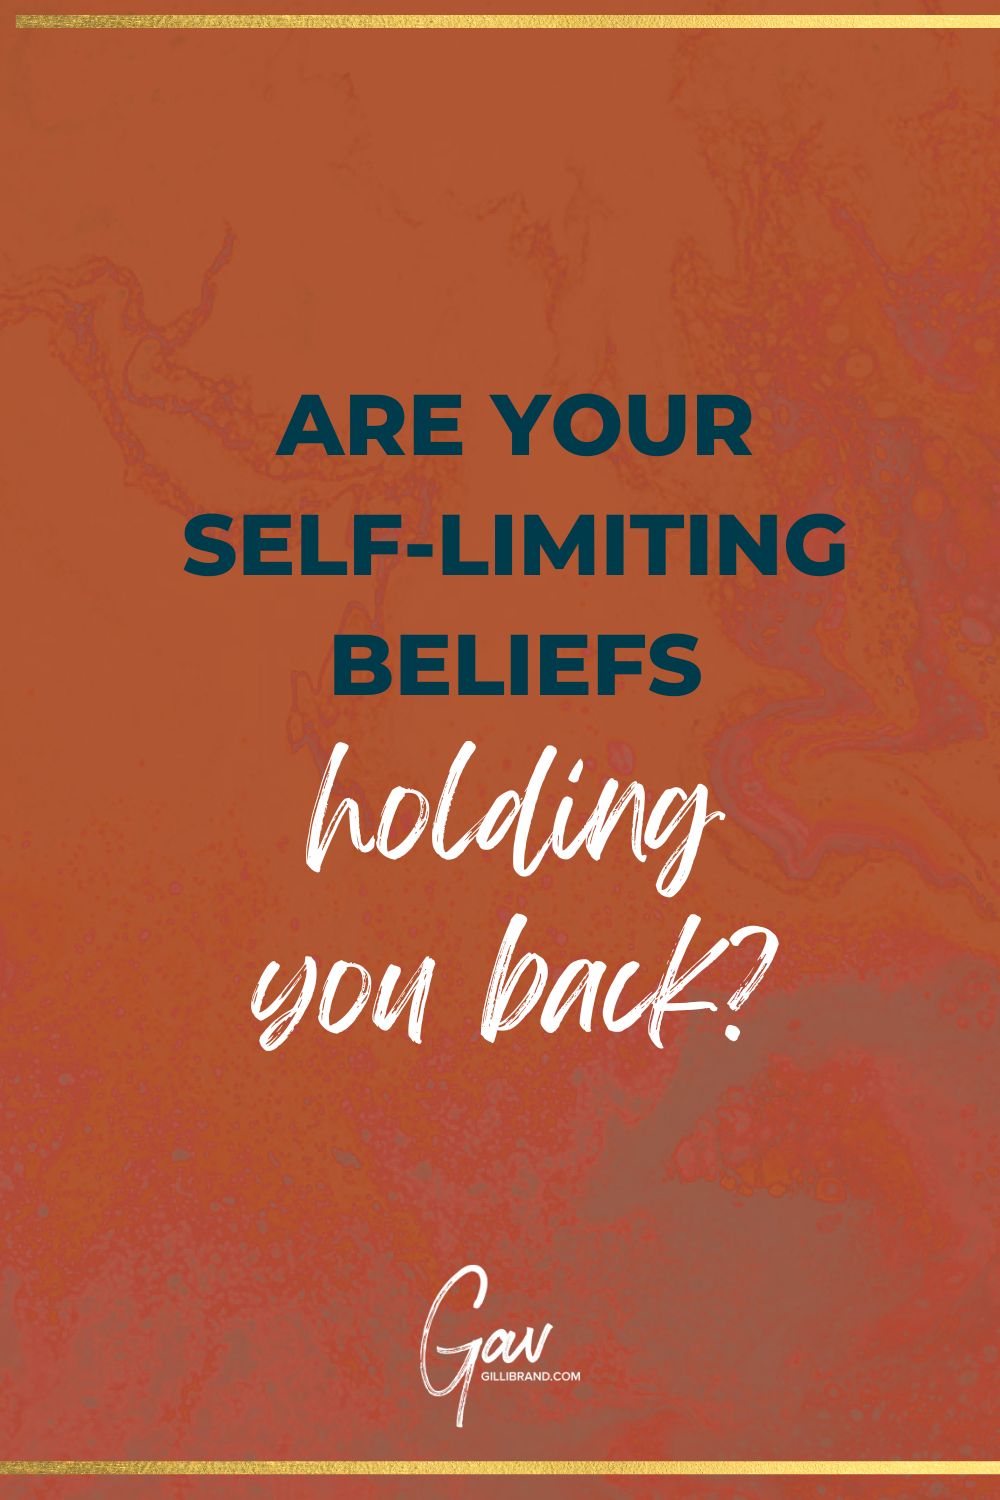 Featured image for “Are Your Self-Limiting Beliefs Holding You Back?”